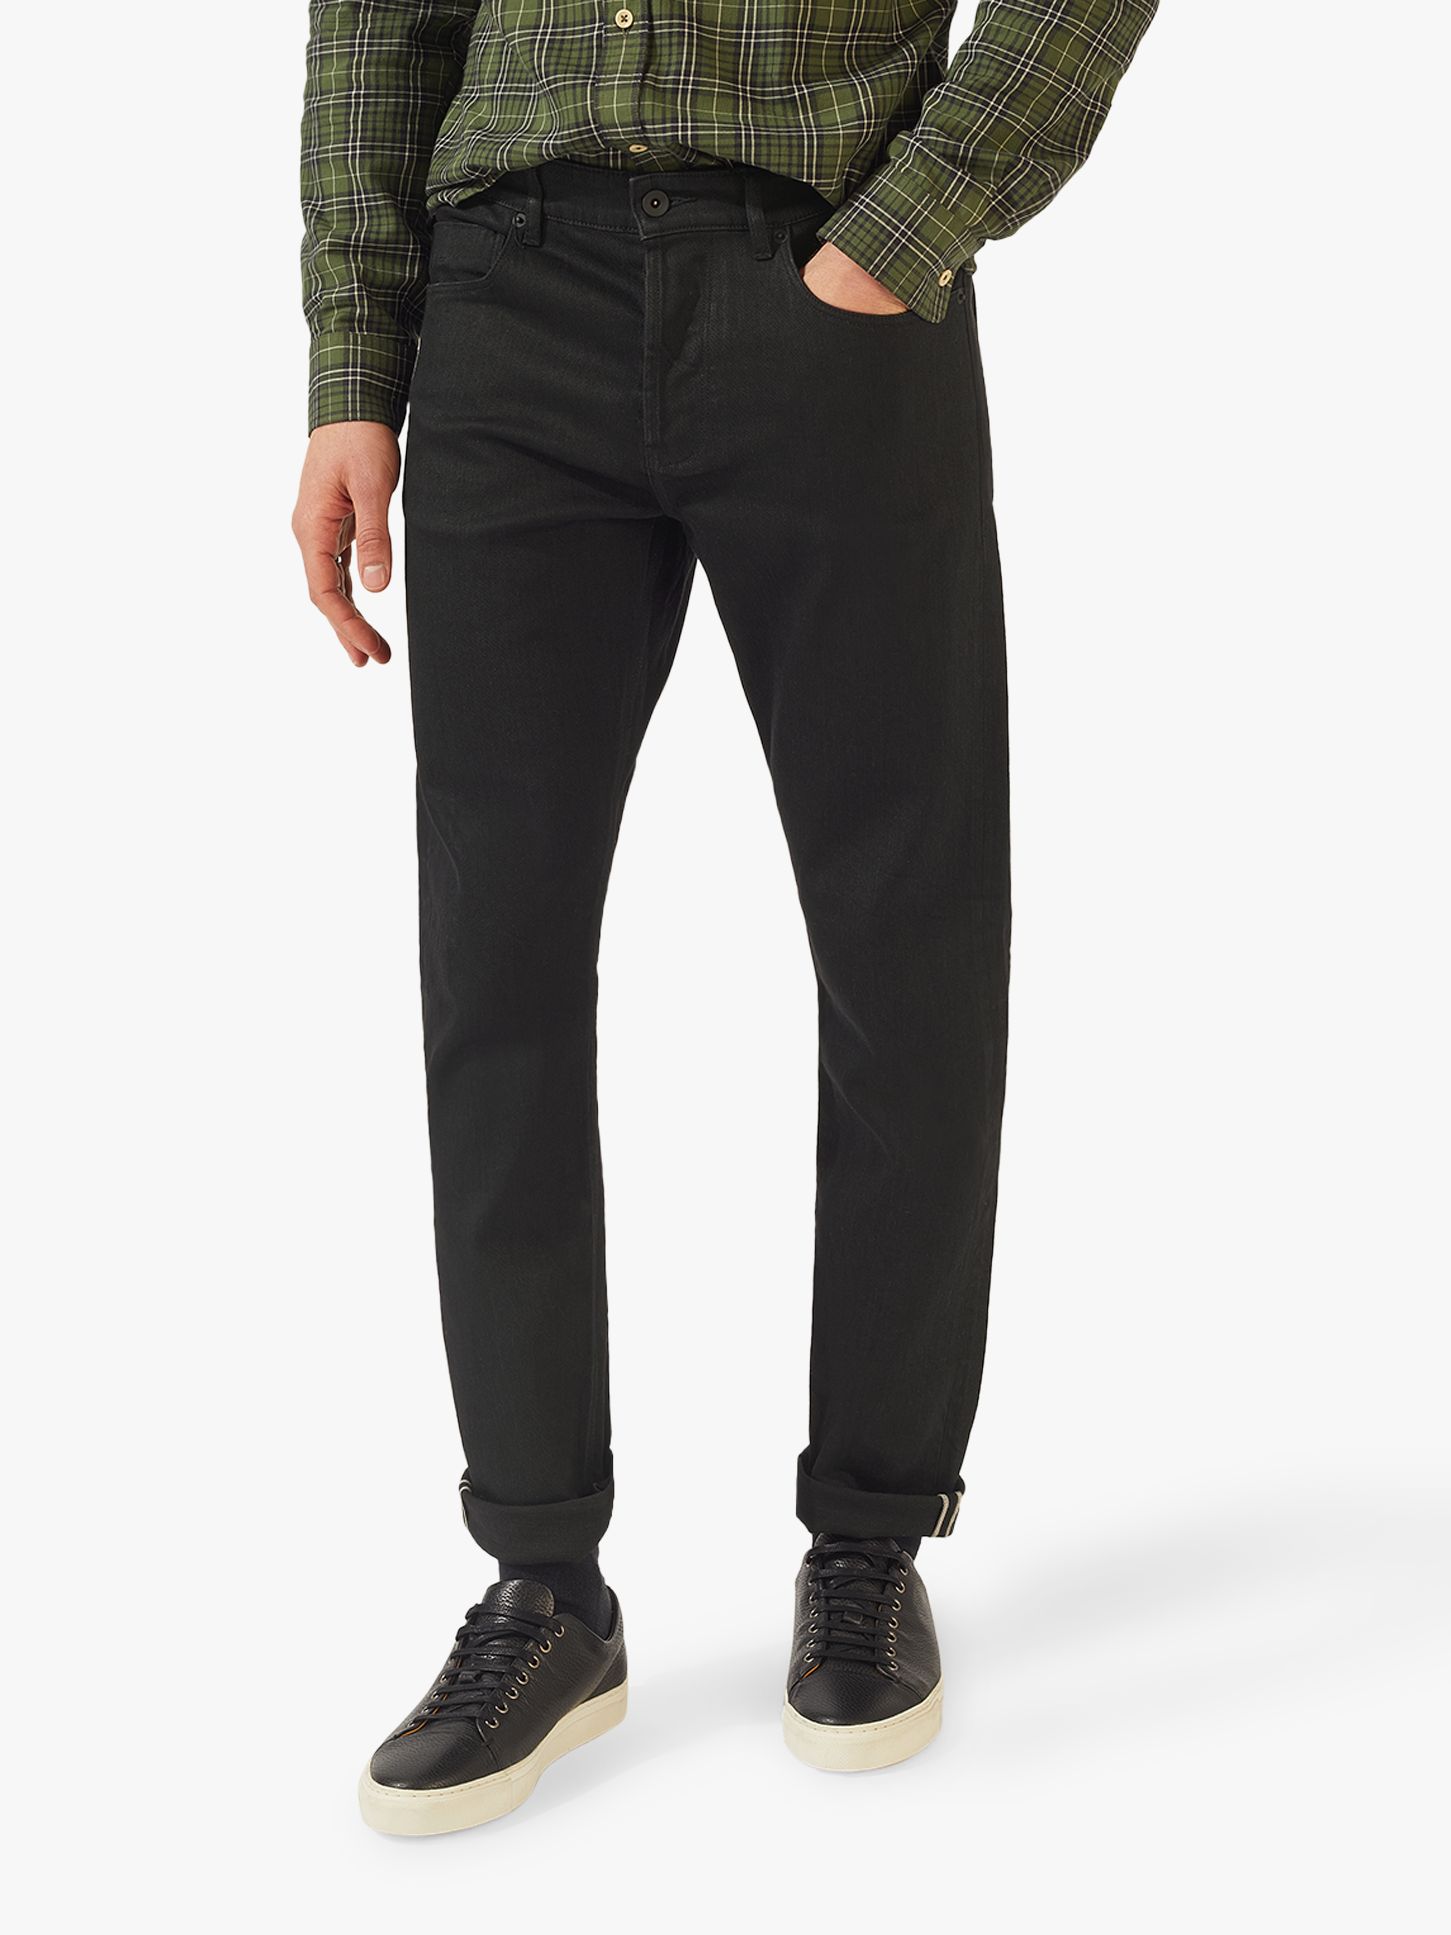 Jigsaw Selvedge Straight Fit Jeans, Black at John Lewis & Partners